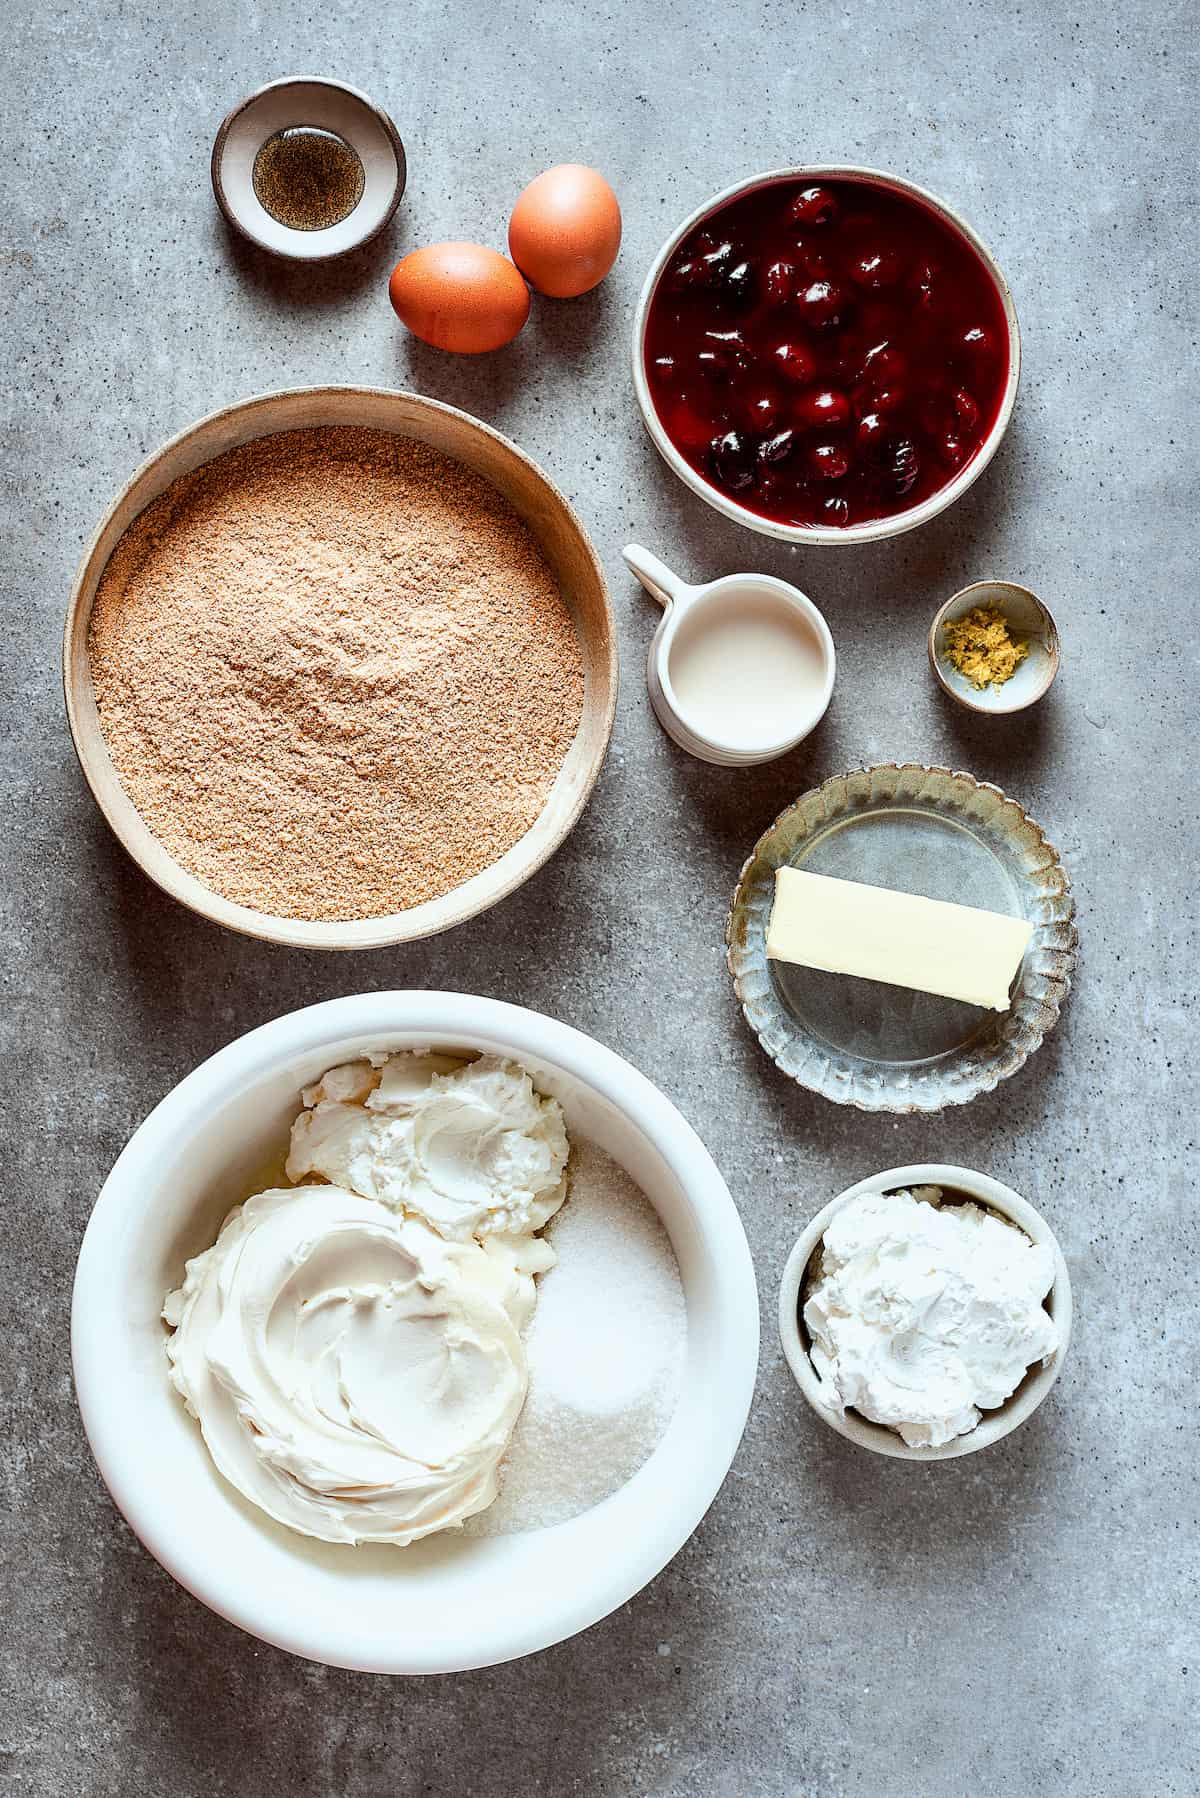 Ingredients for cherry cheesecake arranged on a work surface.